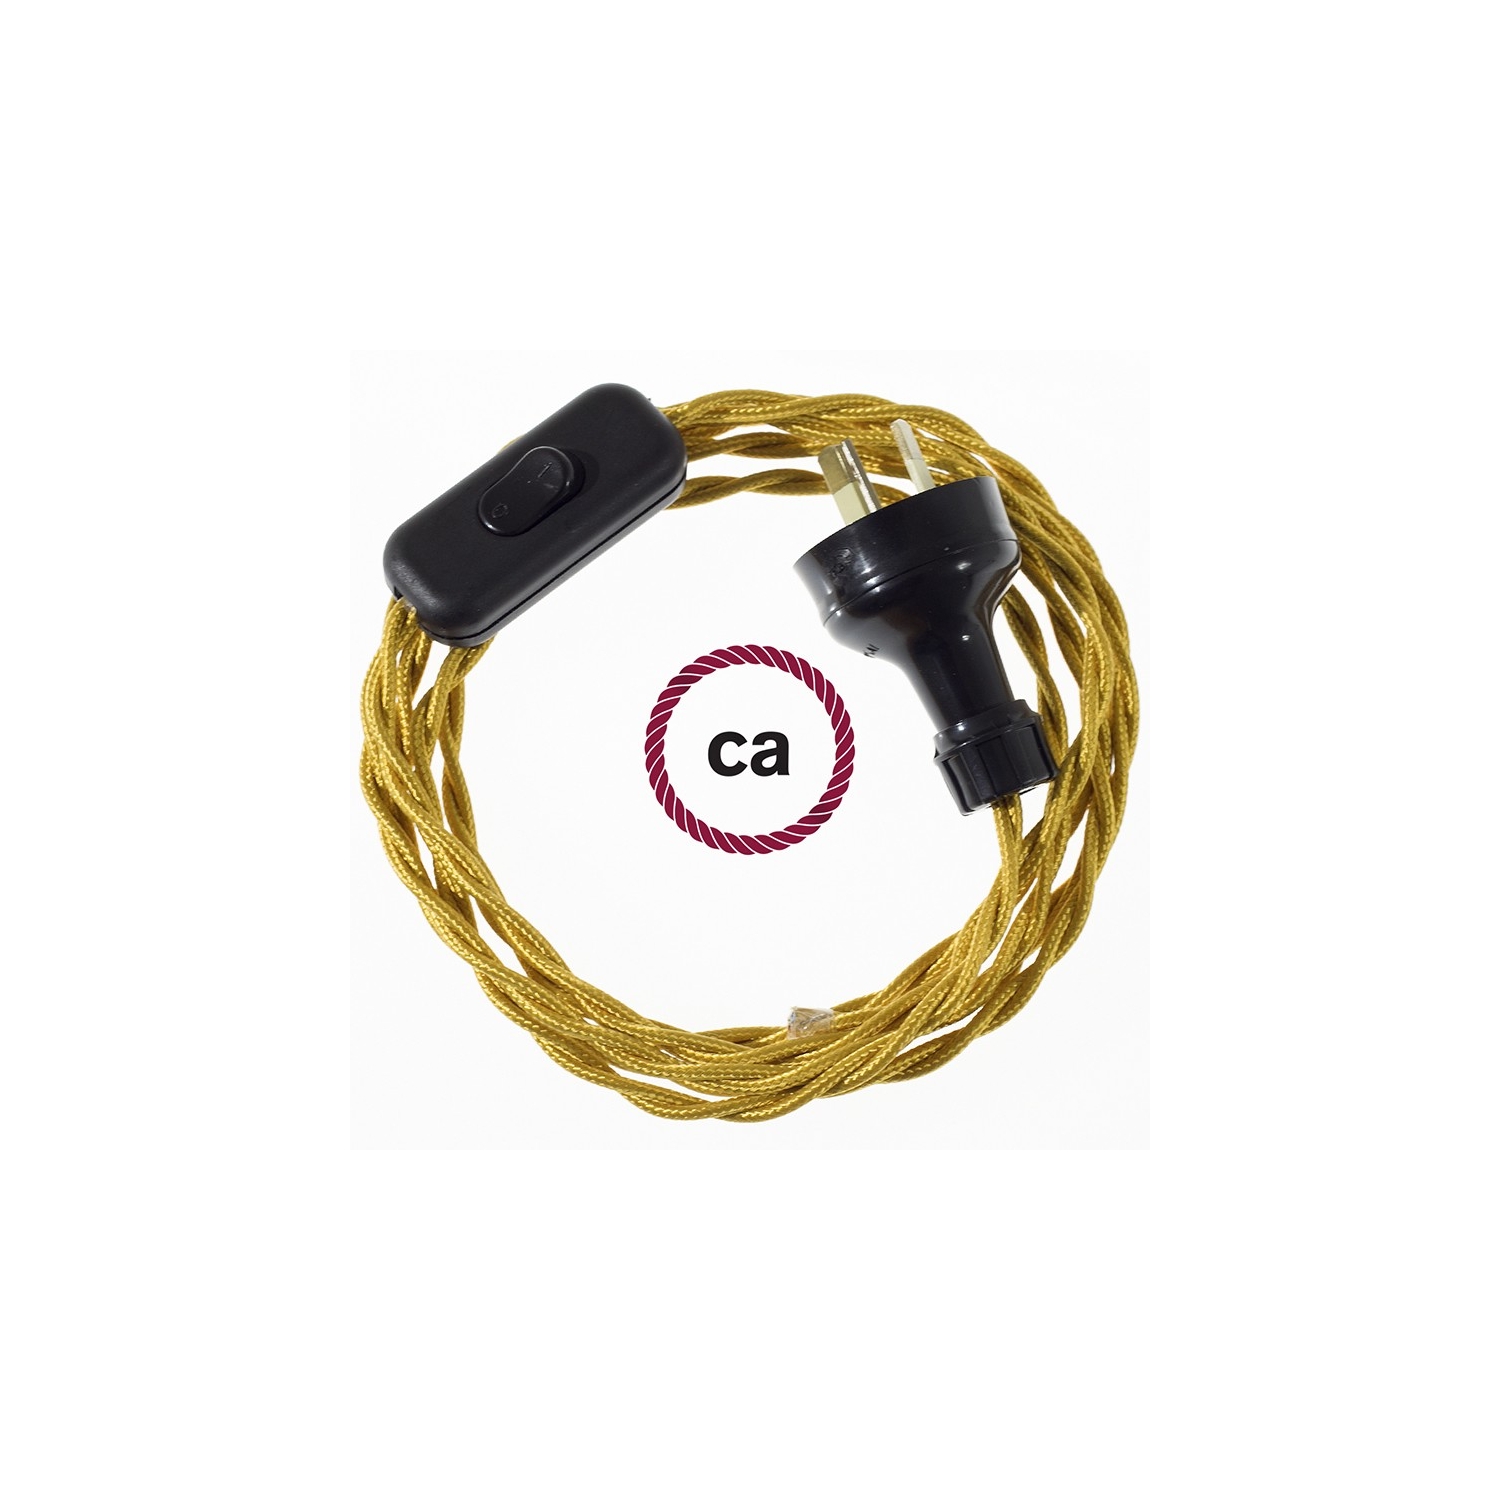 Wiring Gold Rayon textile cable TM05 - 1.80 mt